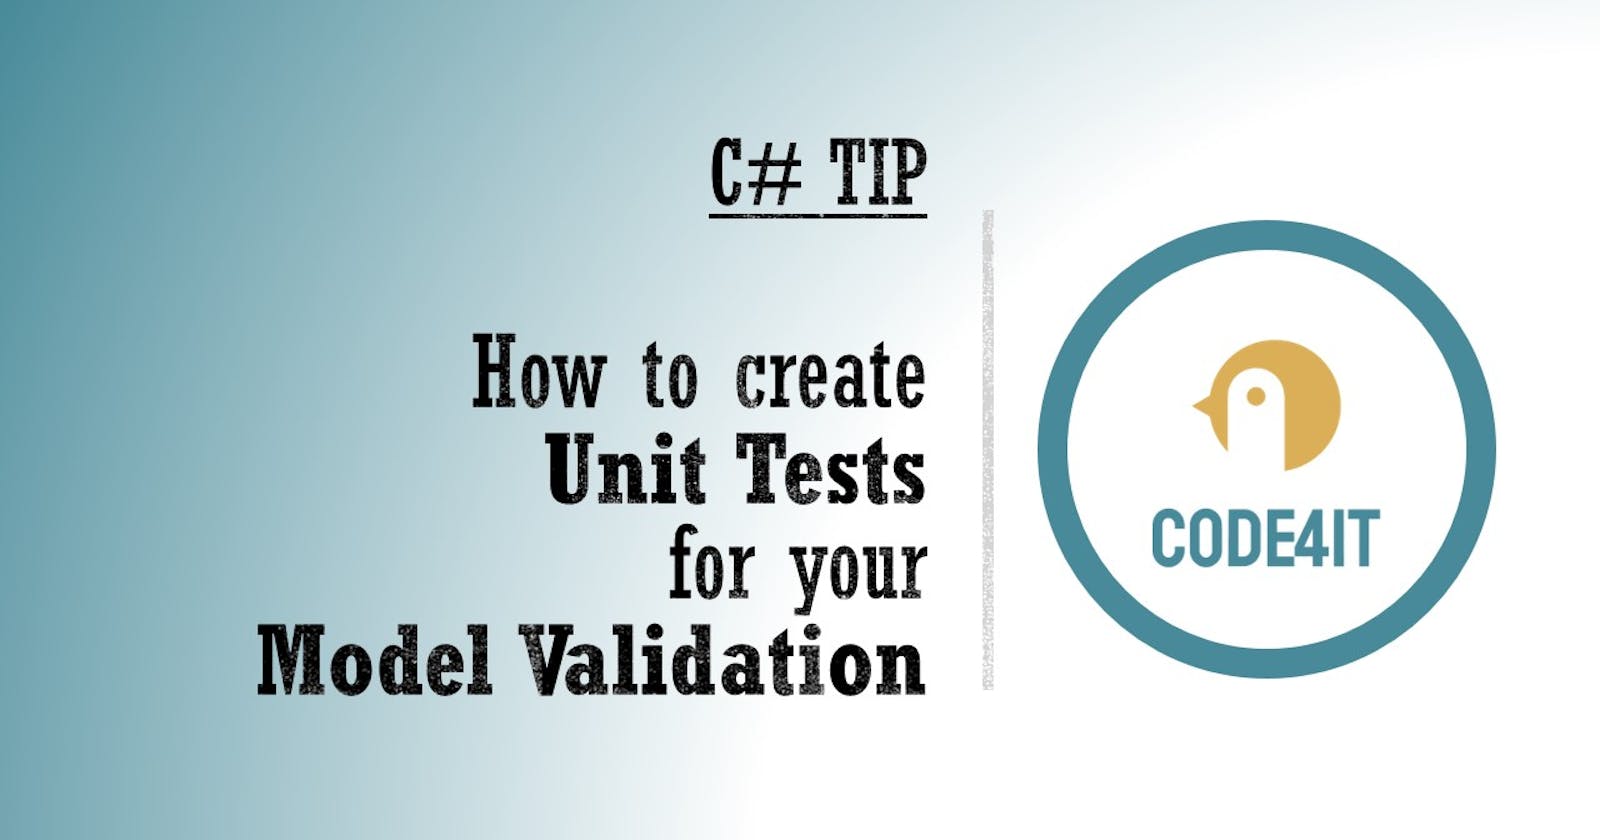 C# Tip: How to create Unit Tests for Model Validation